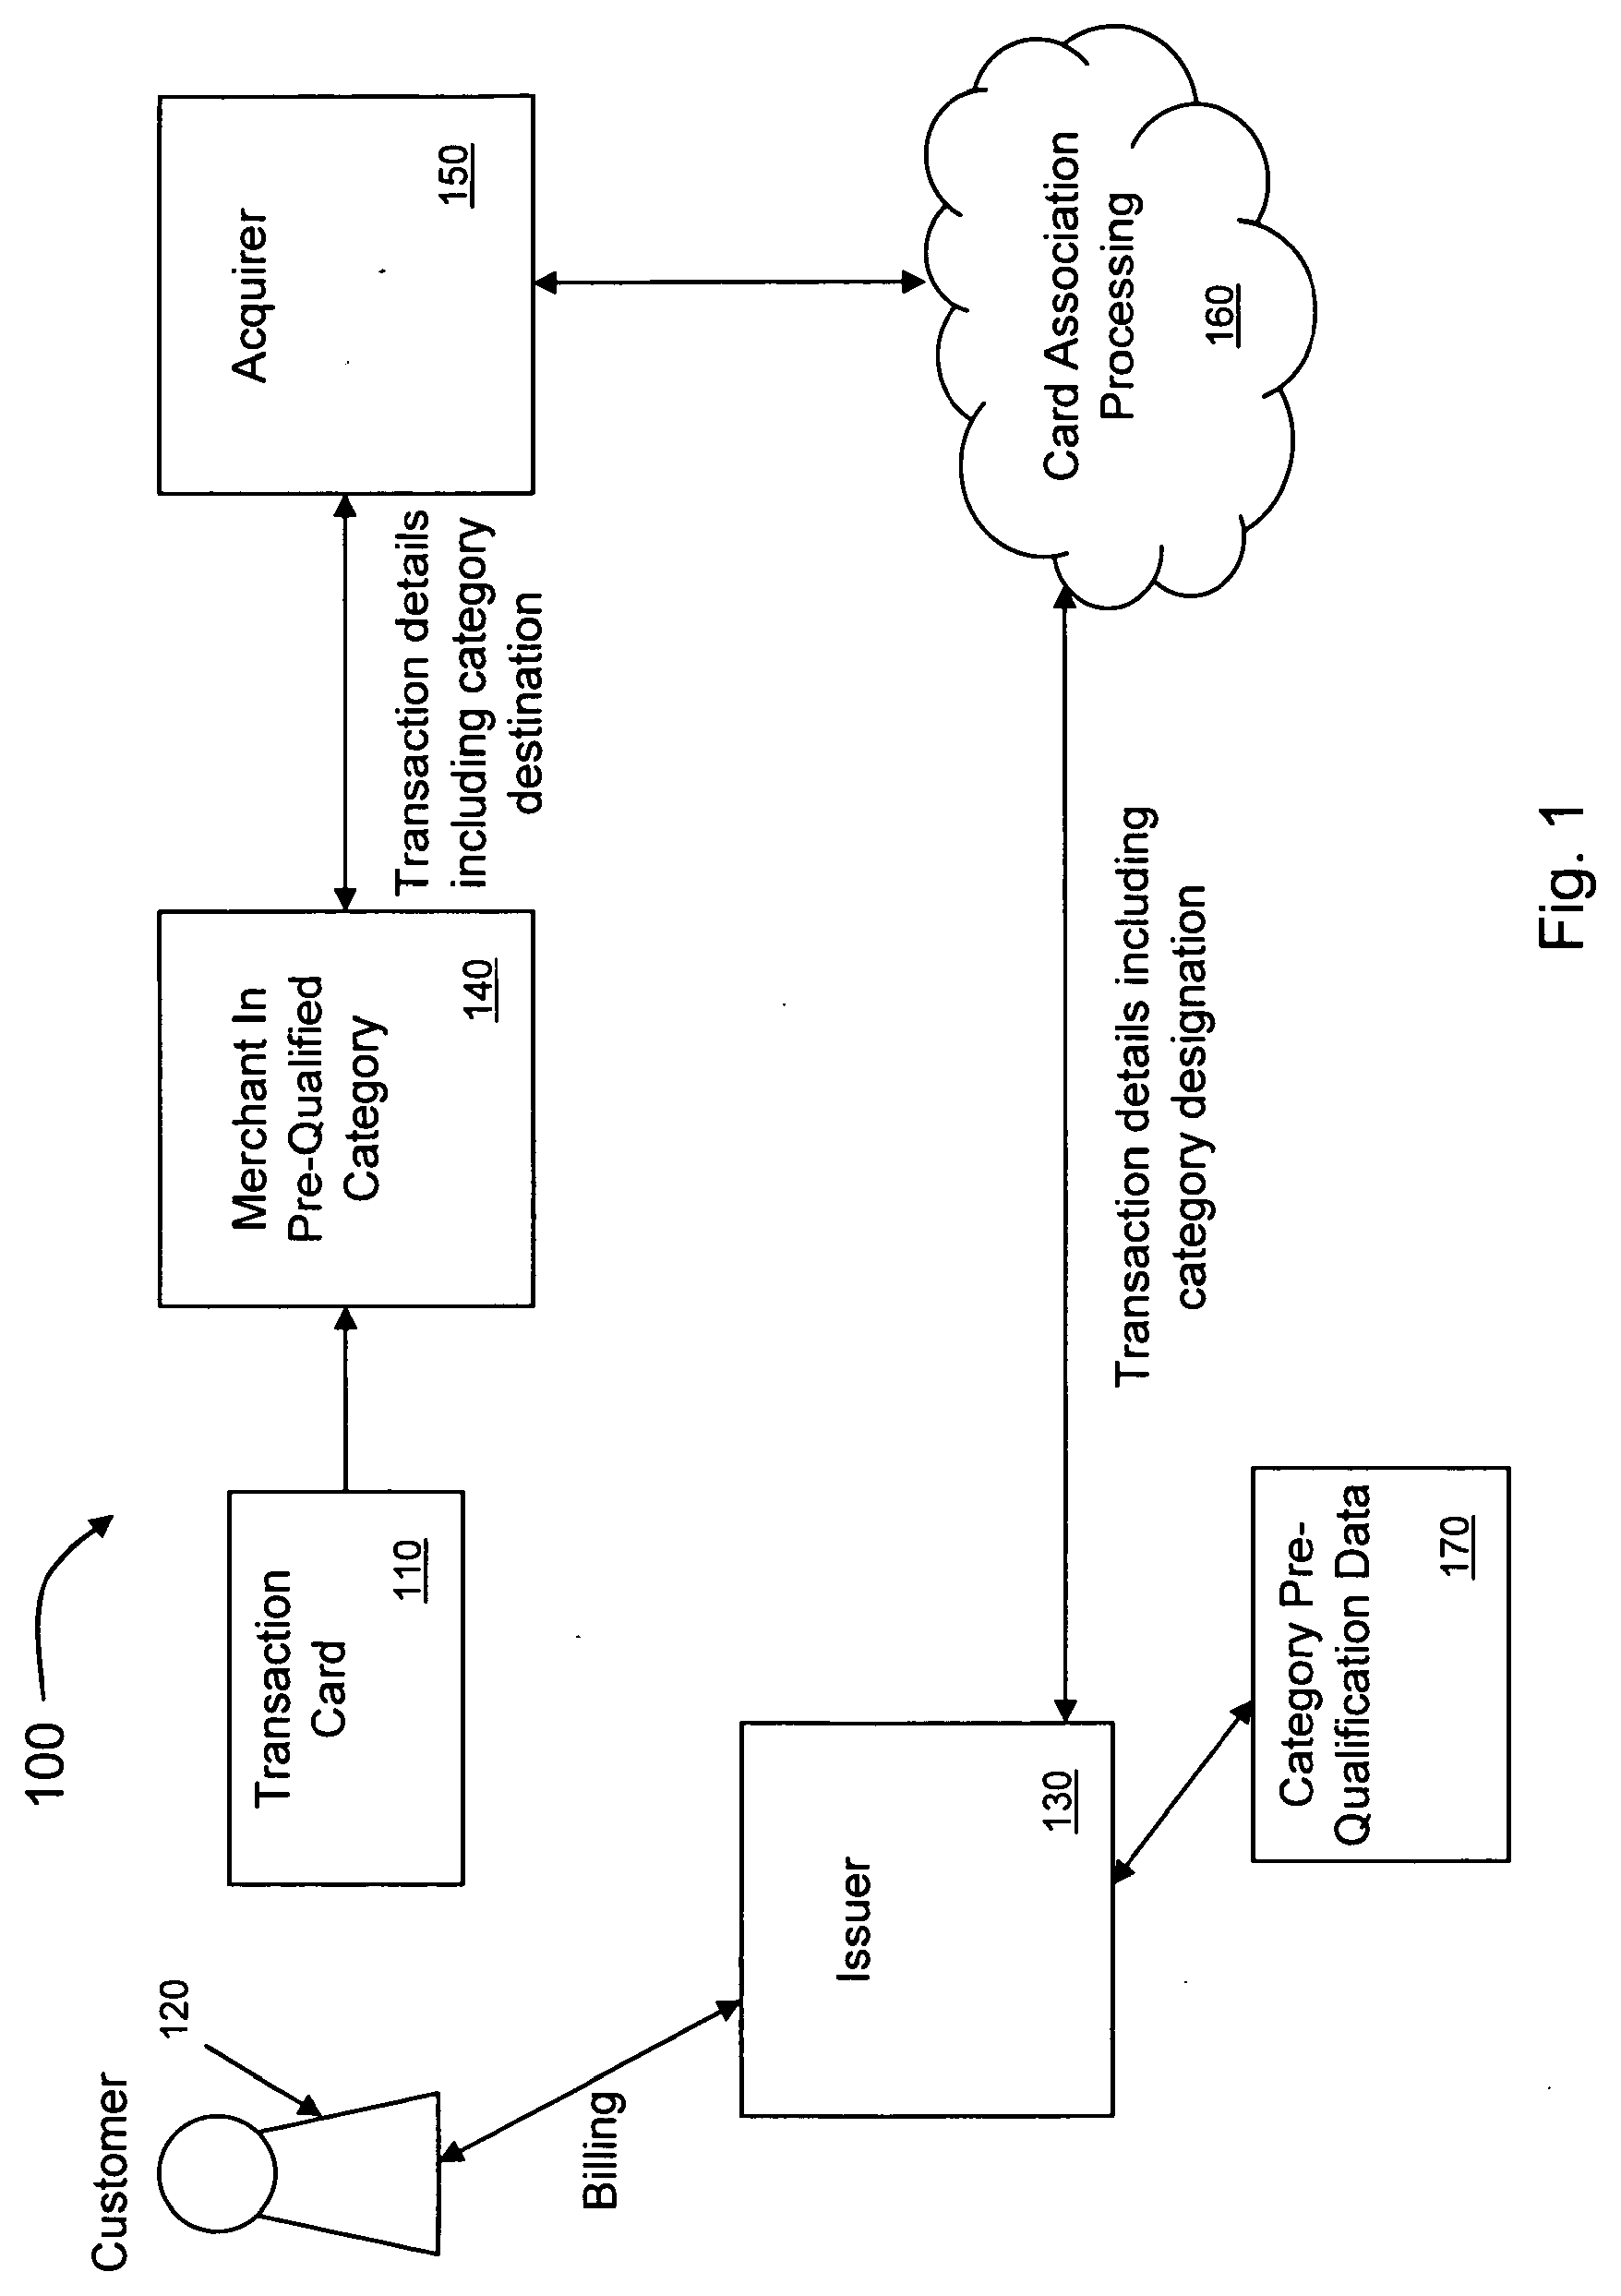 Methods and systems for managing transaction card accounts enabled for use with particular categories of providers and/or goods/services